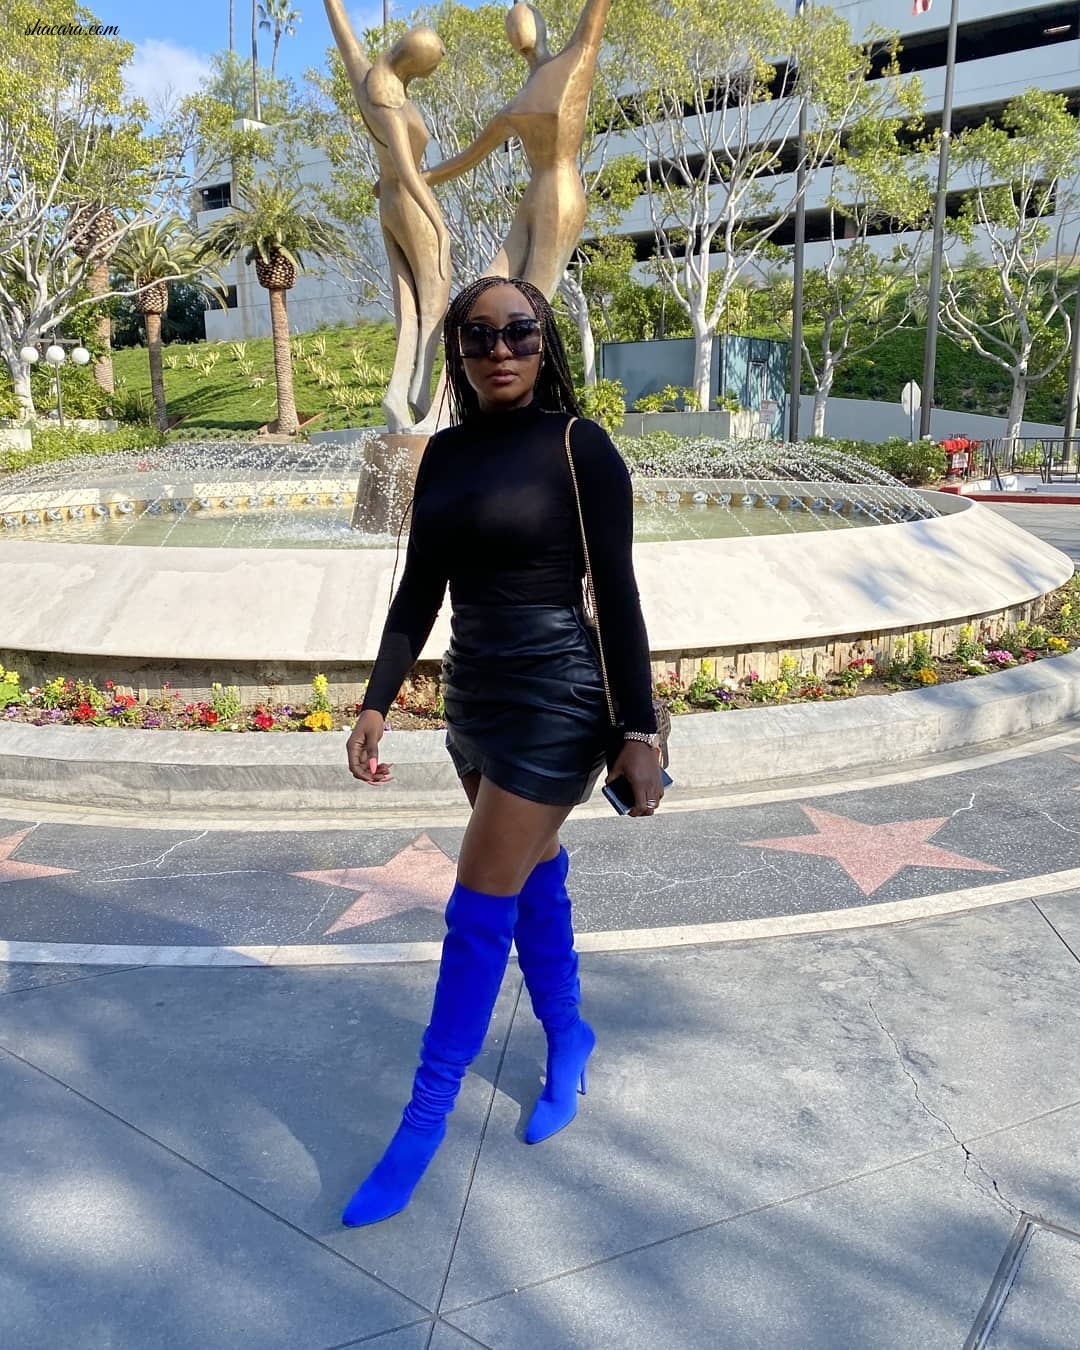 Ini Edo Nails Her Street Style Game While Vacationing In The US